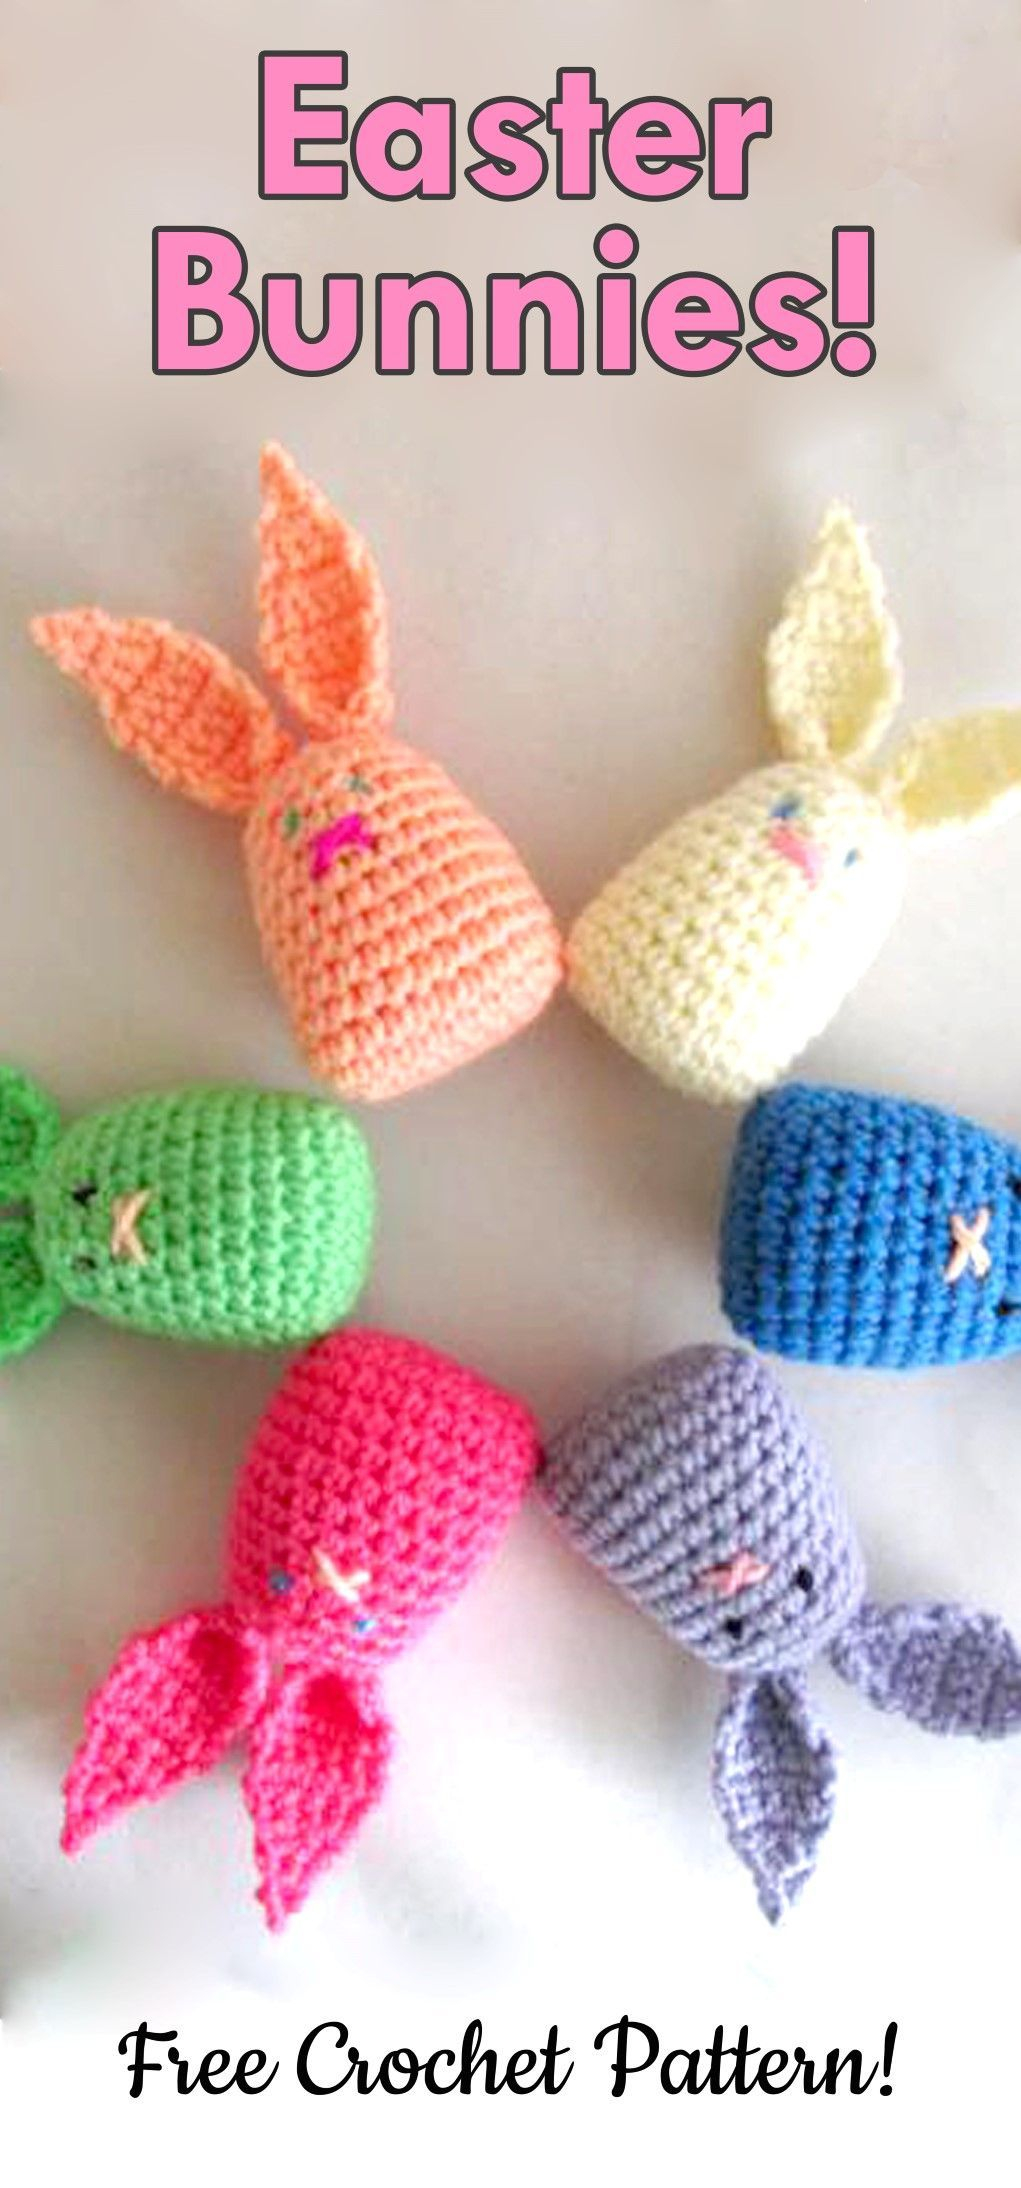 Free Easter Crochet Patterns Easter Bunnies Free Crochet Patterns Easter Ideas Easter